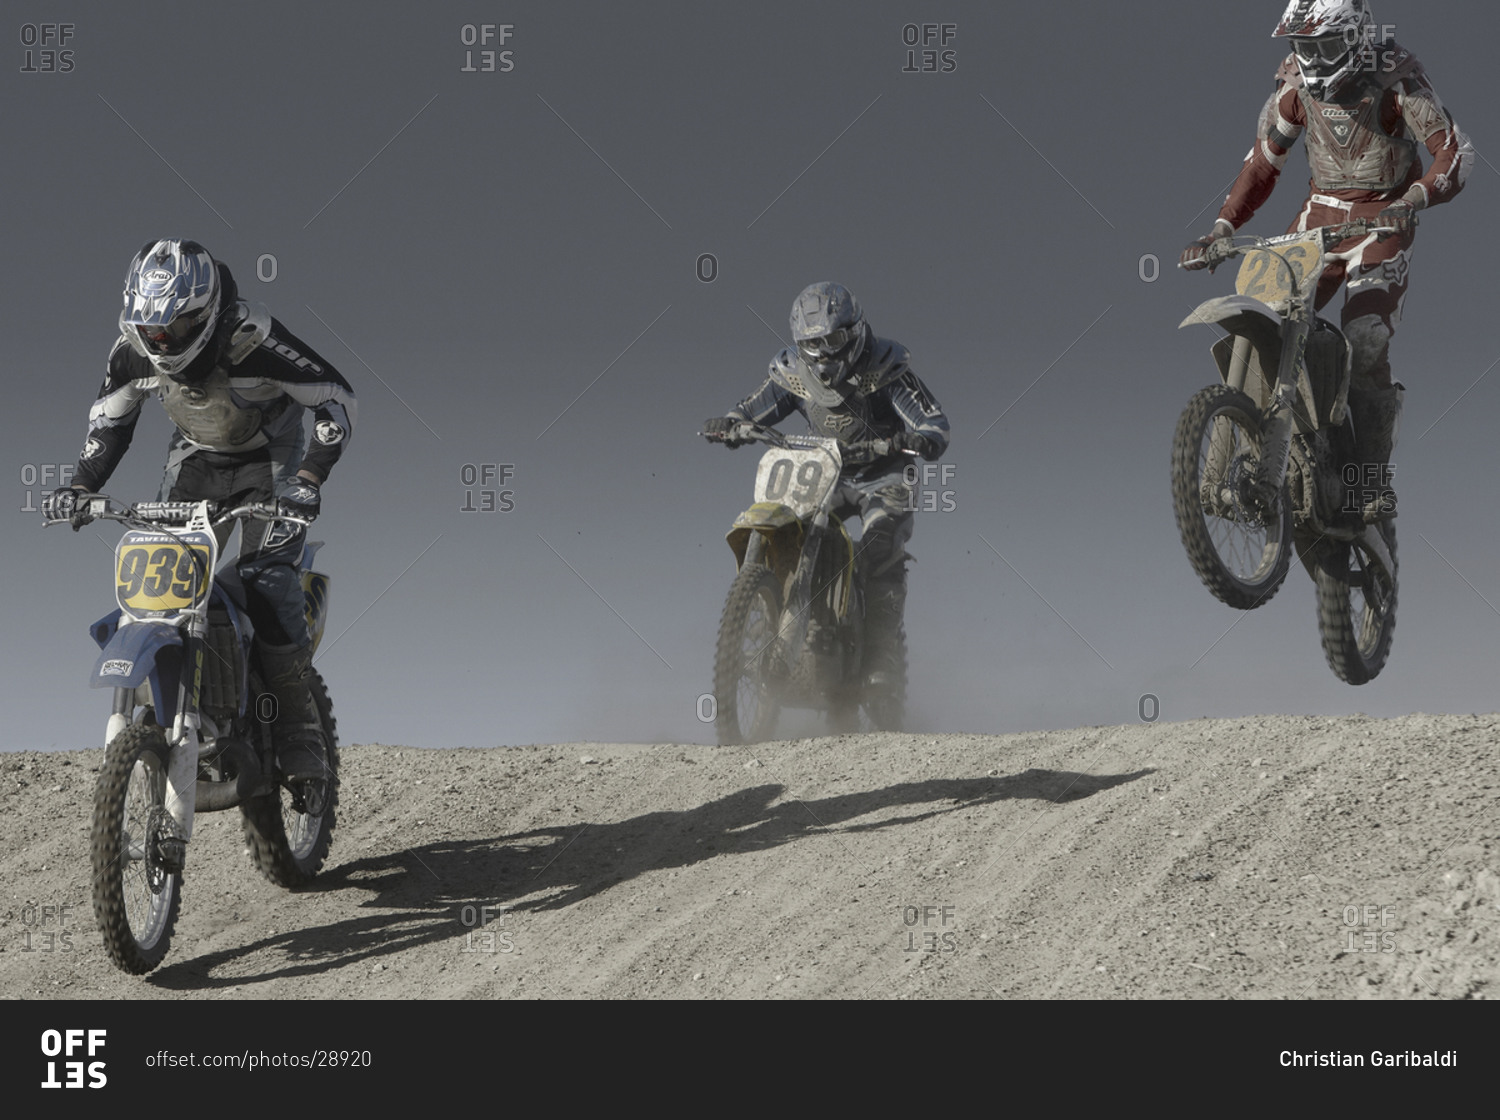 Motorcycle racers kicking up clouds of dust during race